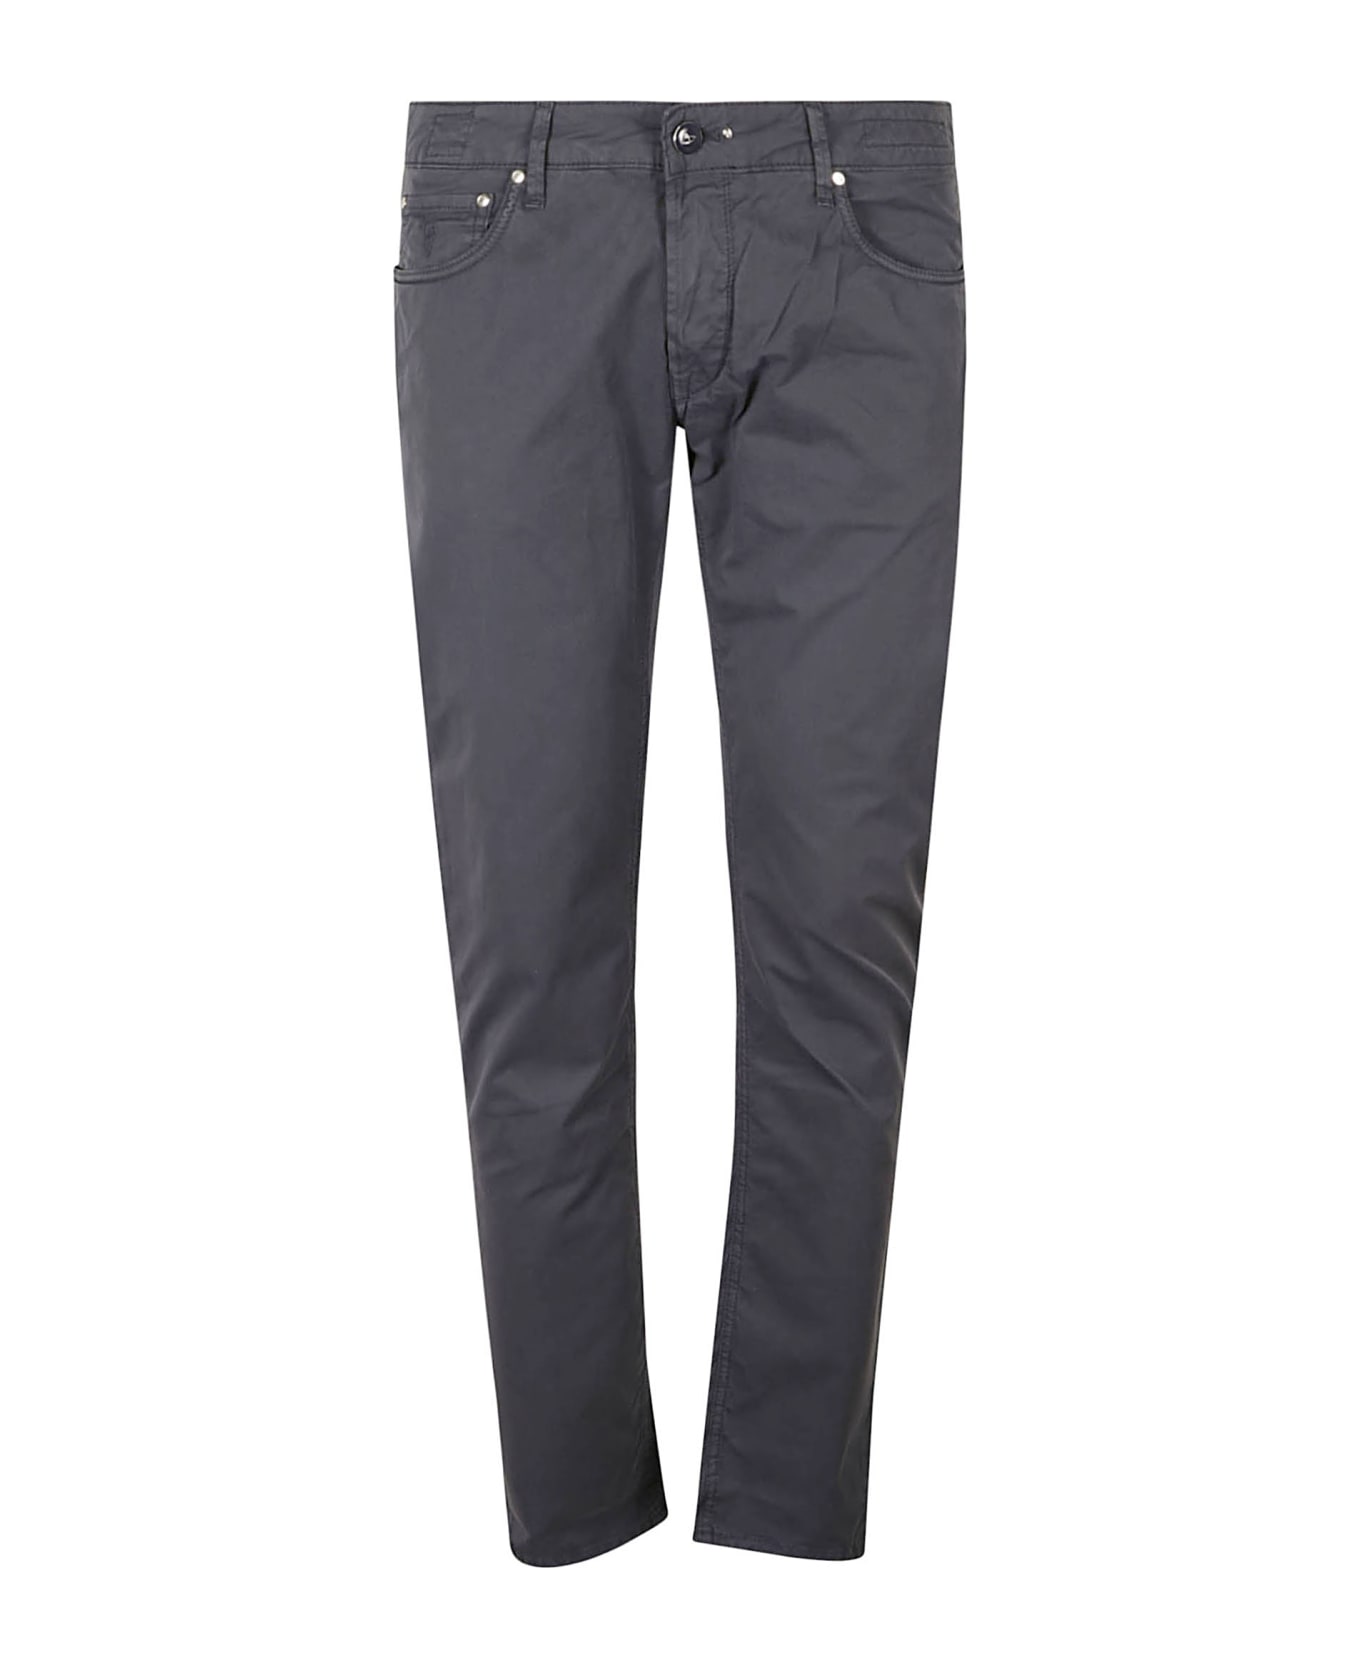 Hand Picked Orvietoc Jeans - Blue